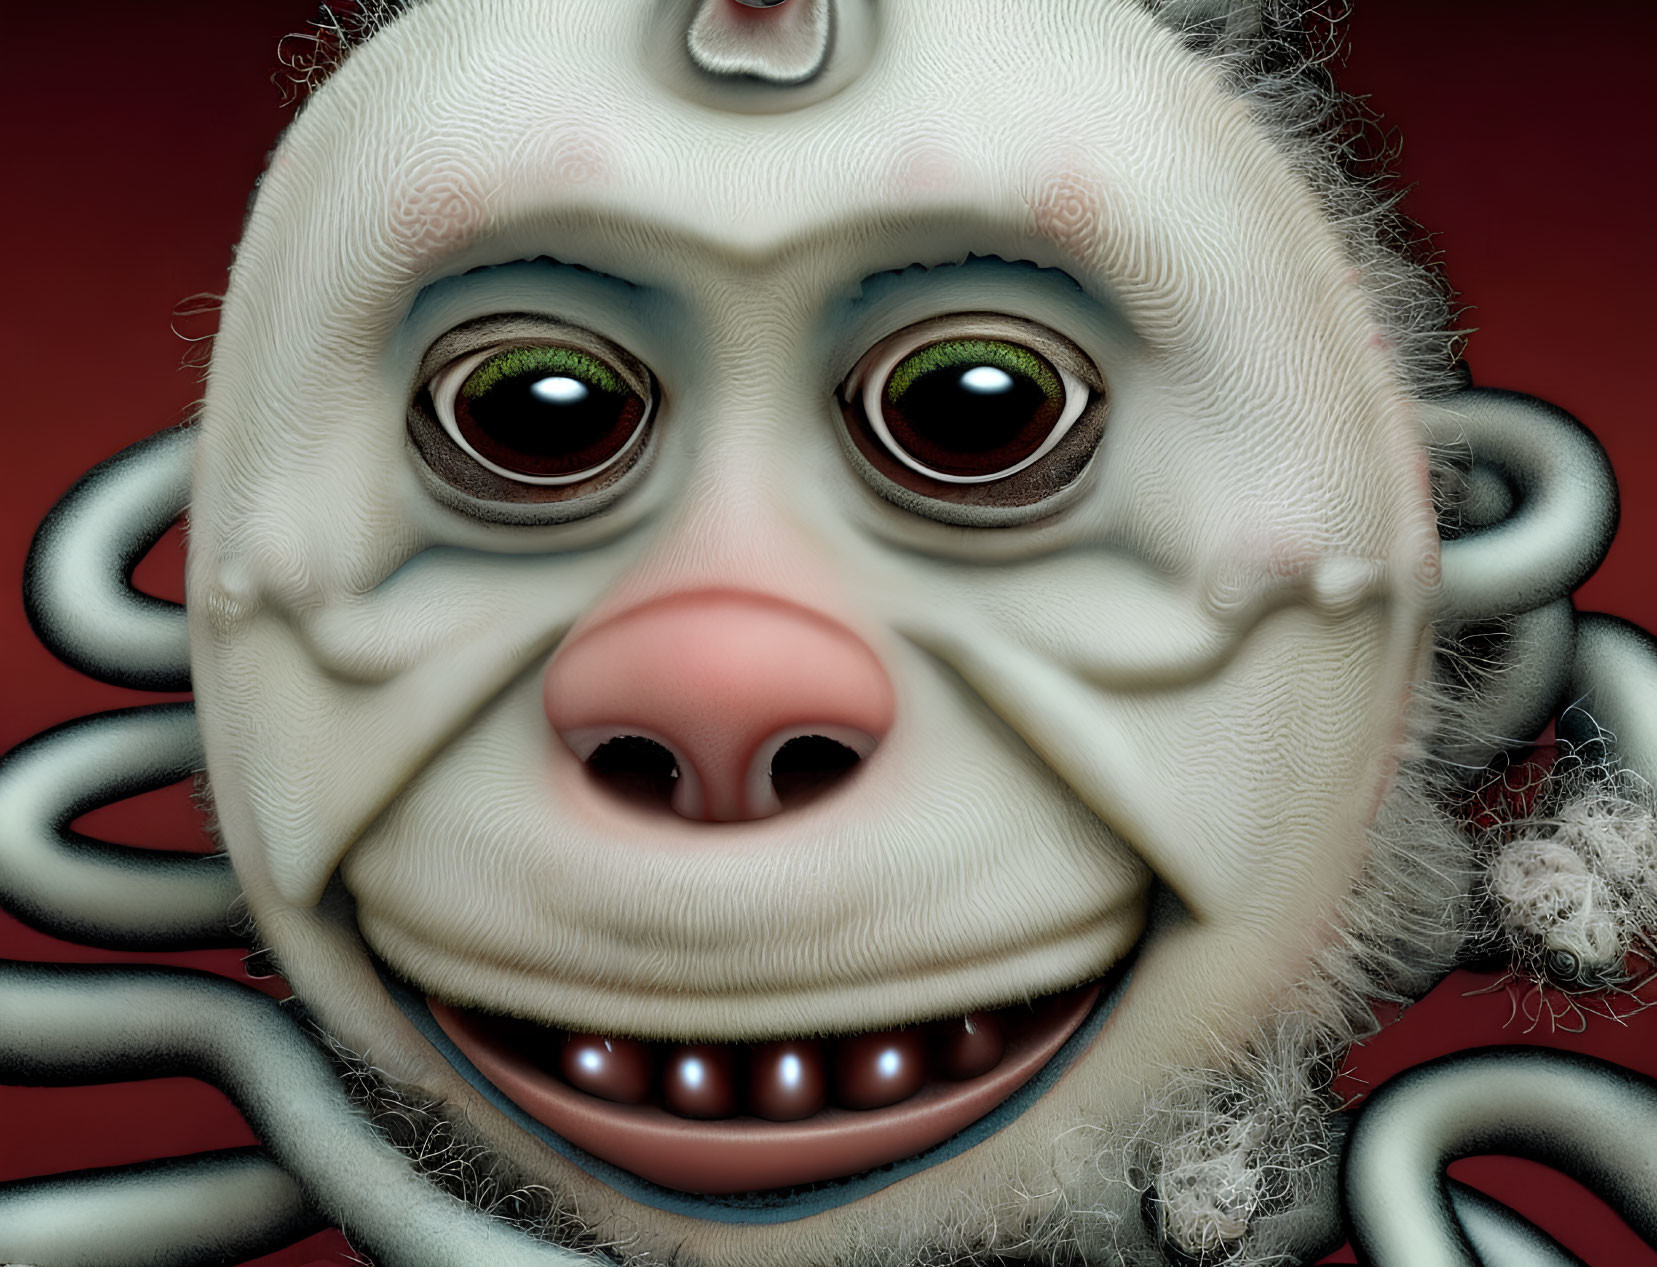 Surreal creature with simian face and serpentine eyes on red background